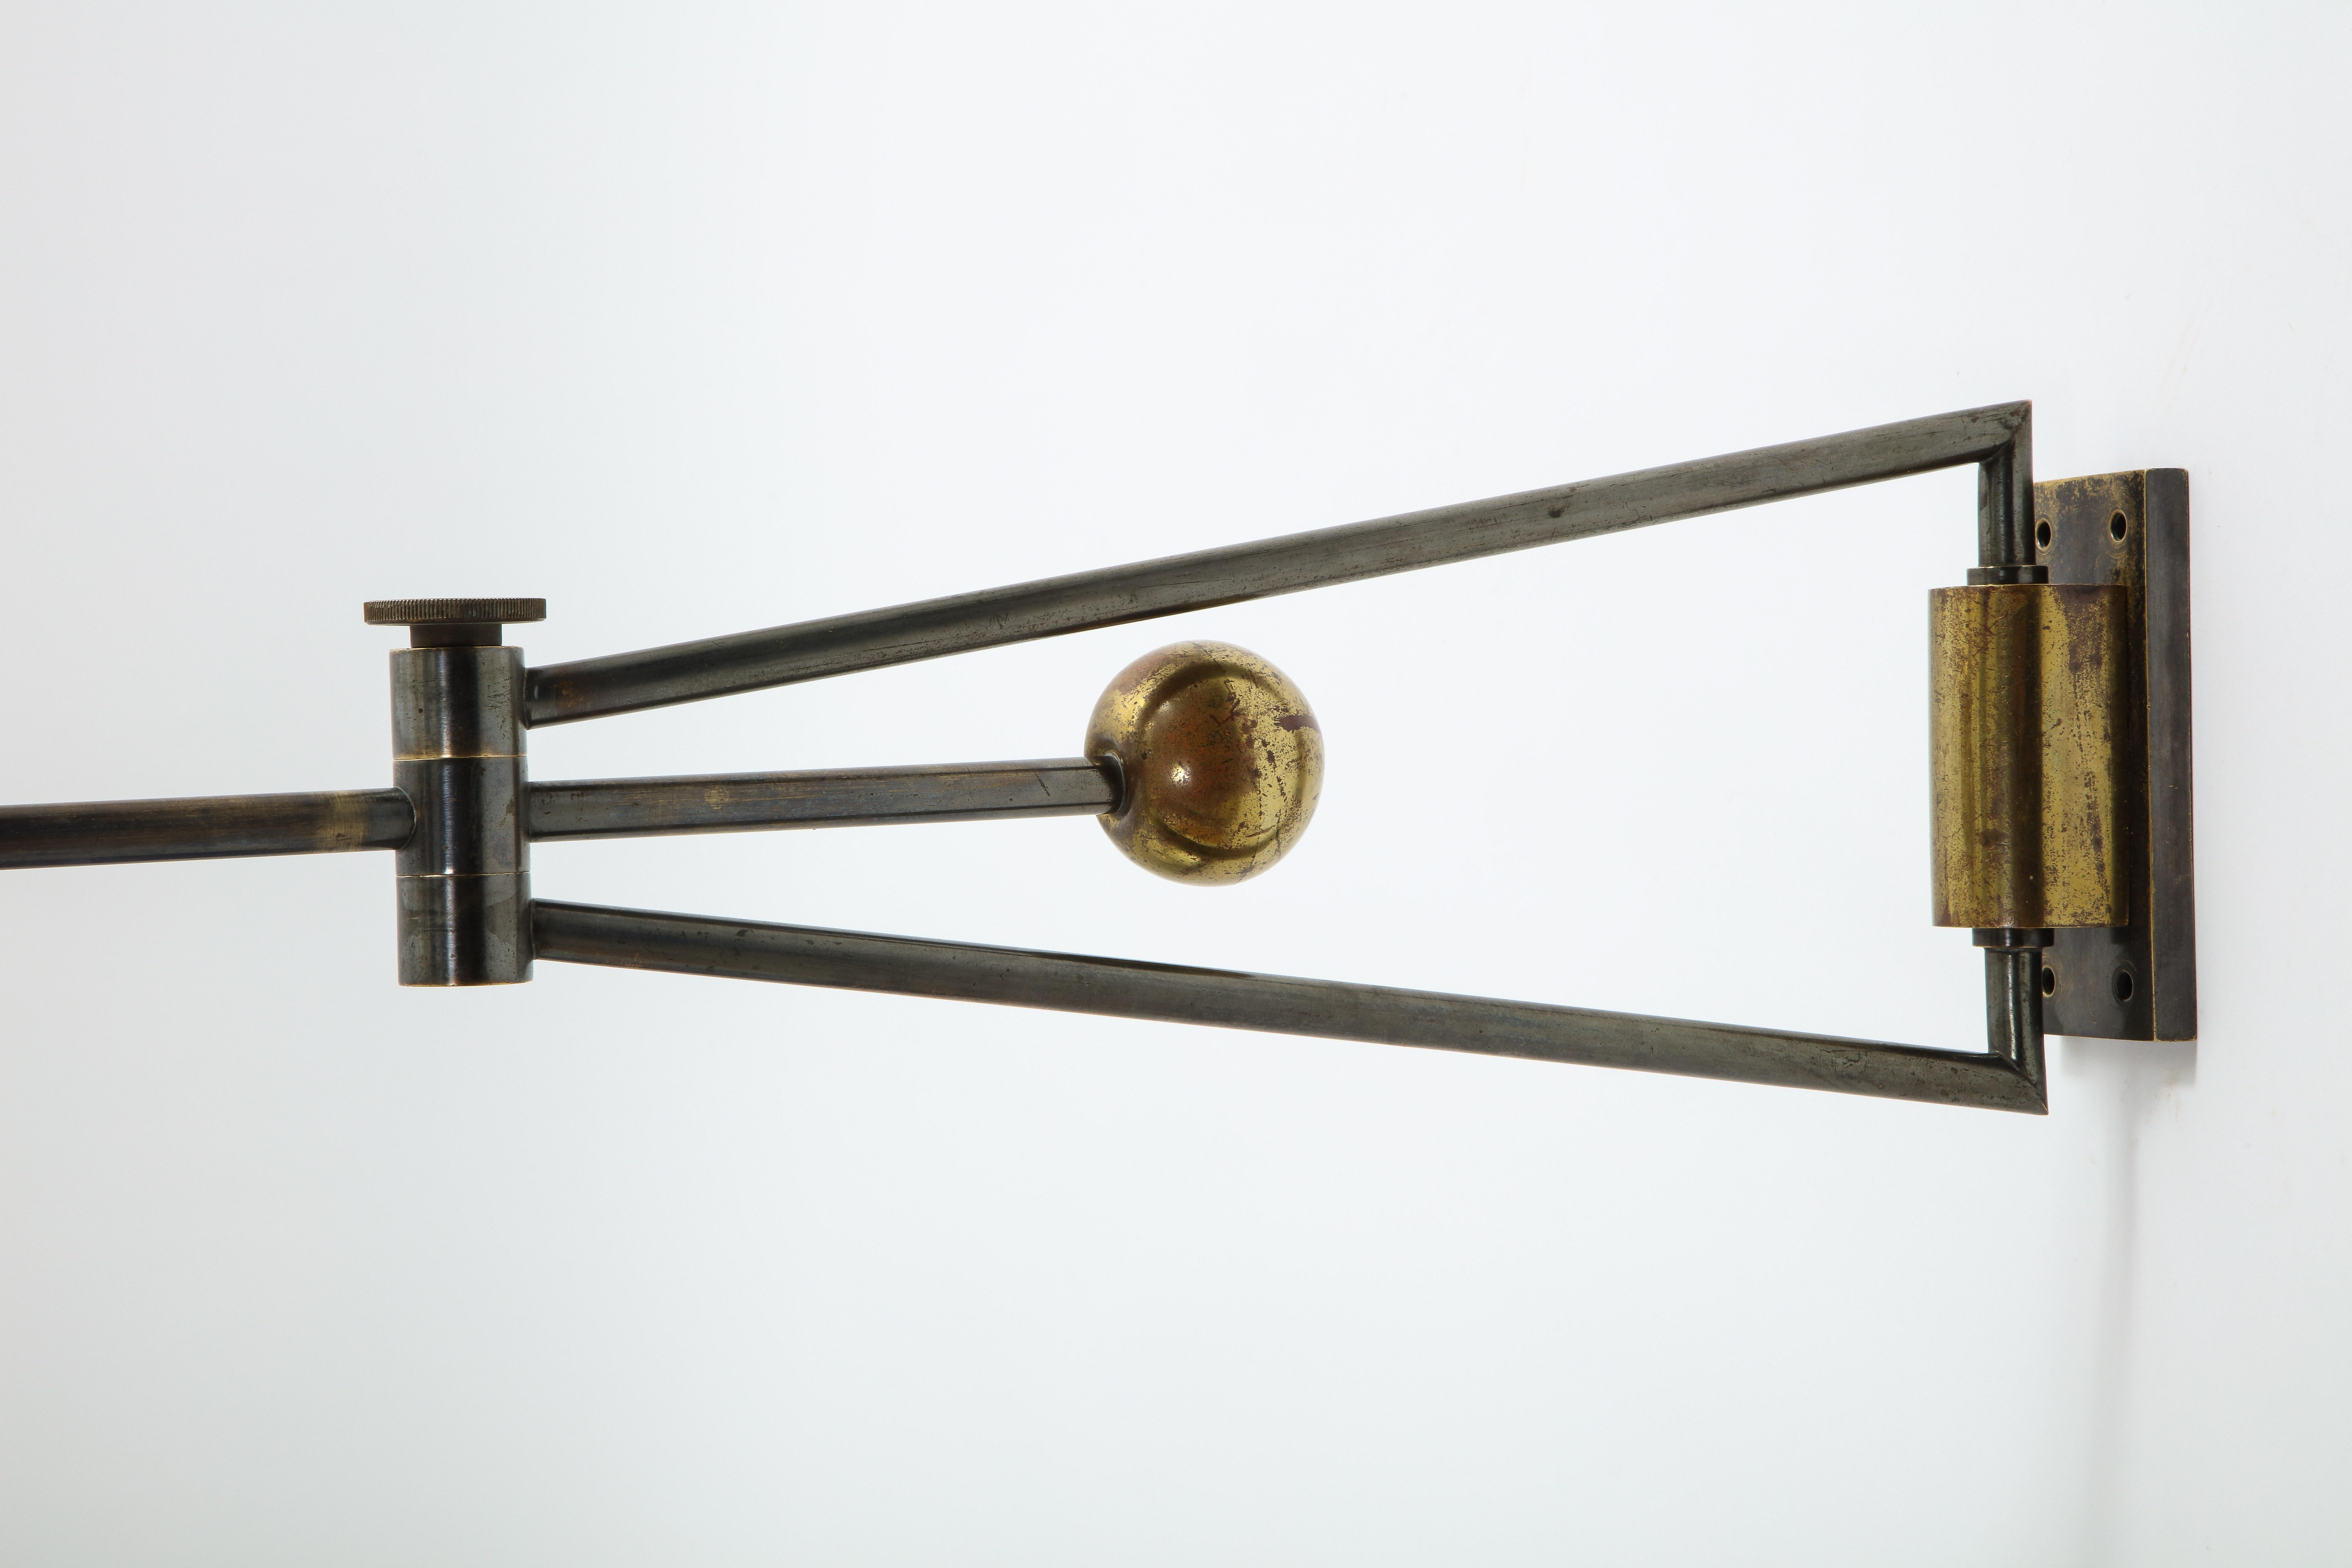 Architectural wall sconce in original gunmetal and brass patinas by Kobis Lorens, adjustable from side to side. 

Shade for pictures purposes, rewiring, and backplates on request. 

Very special patina, modeled with beautiful highs and lows.